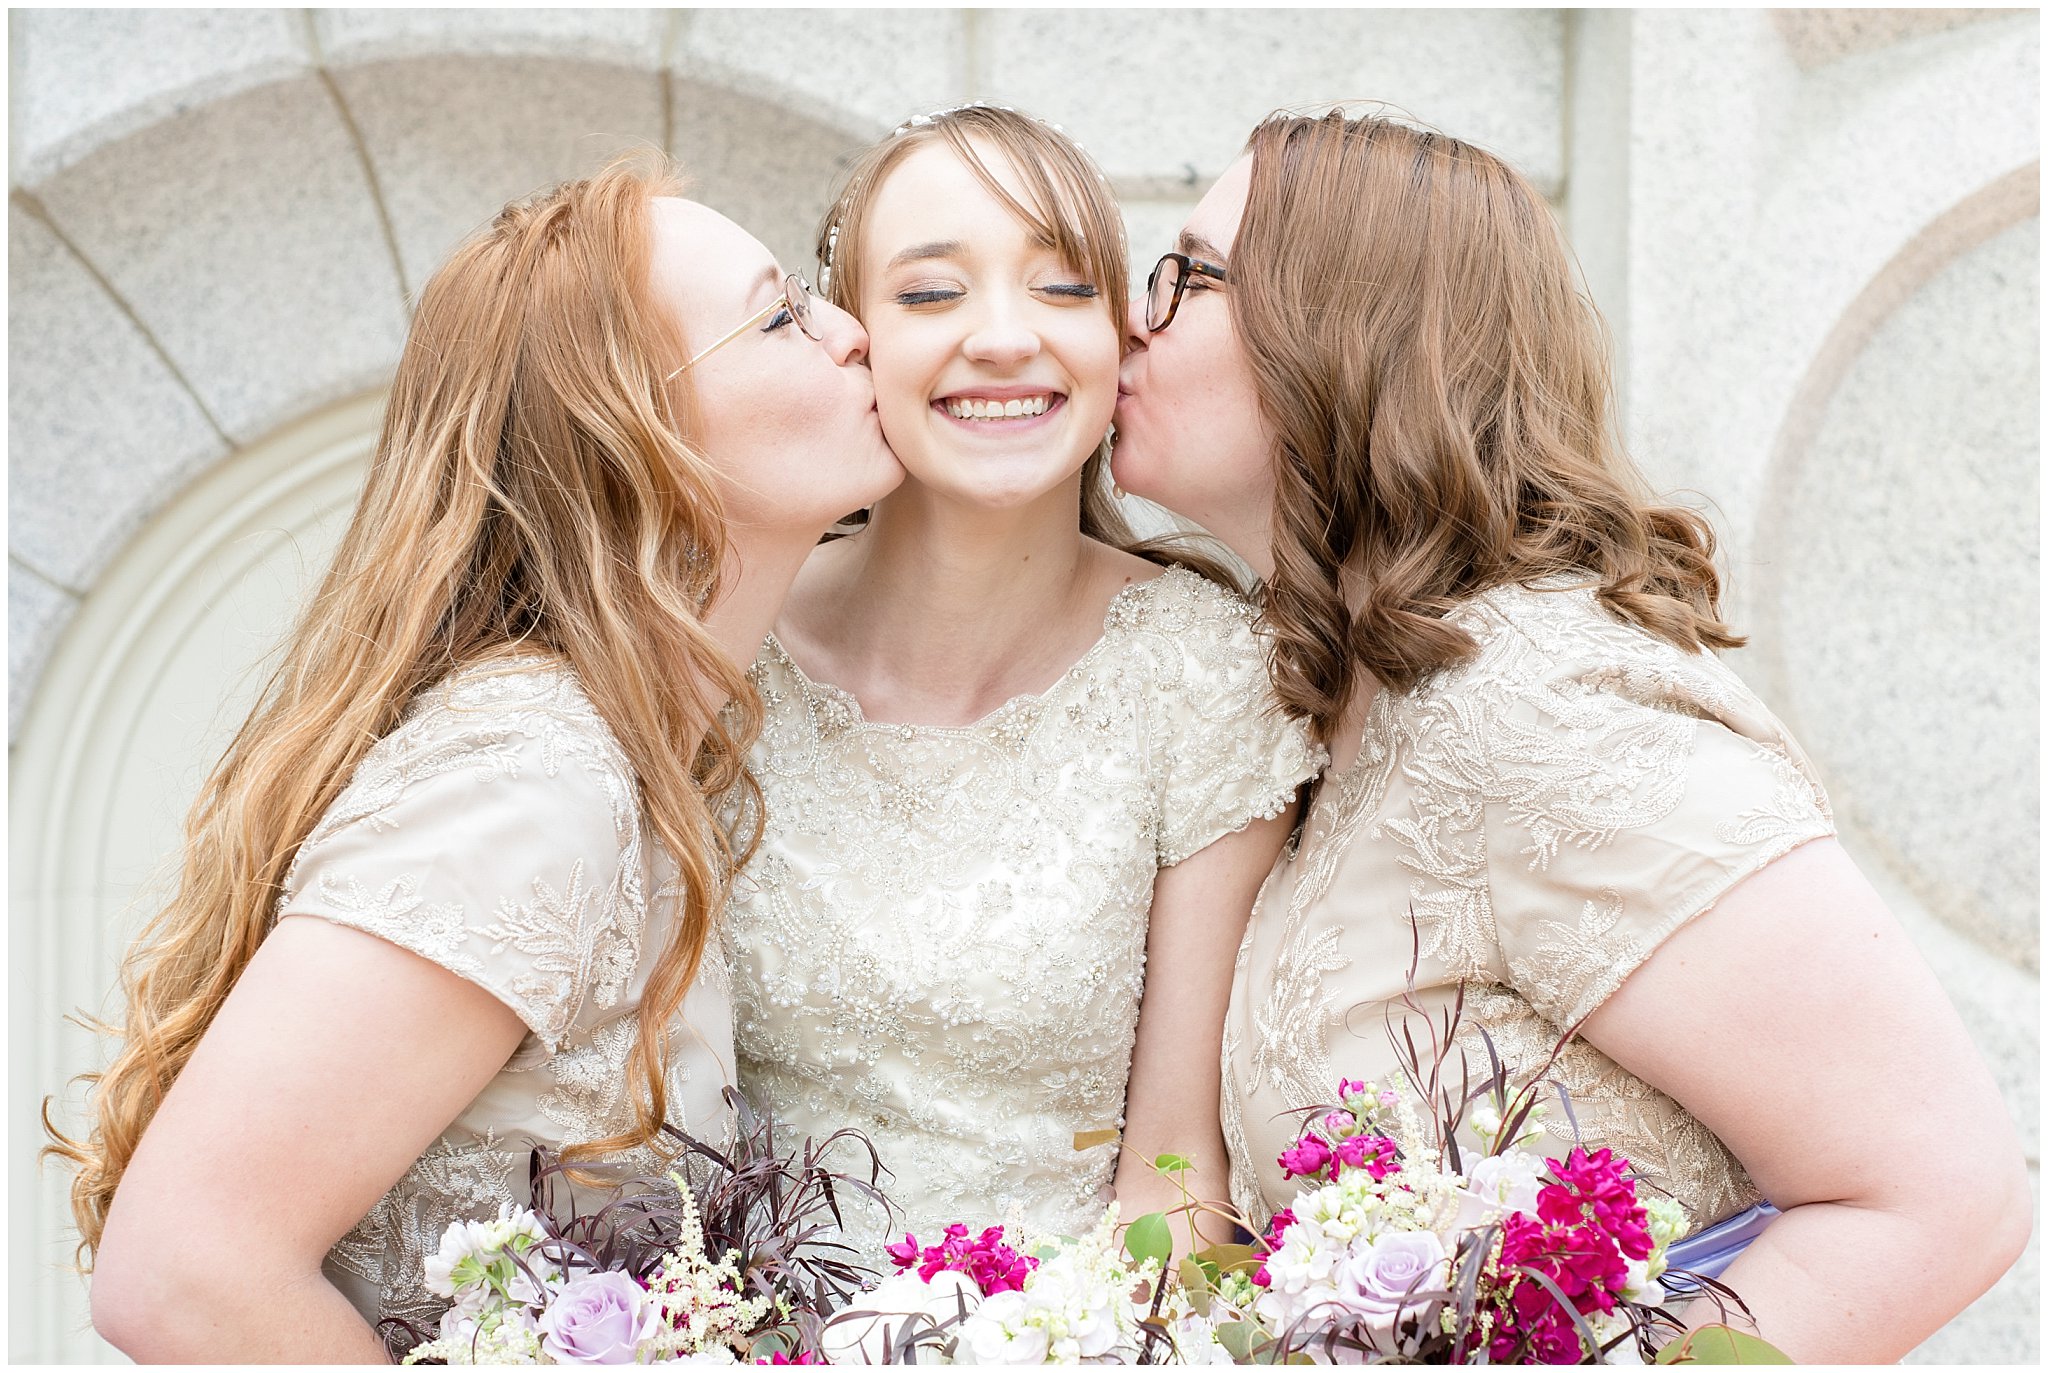 Bride with bridesmaids kissing her on the cheek | Candid wedding pictures | Salt Lake Temple Wedding | Jessie and Dallin Photography